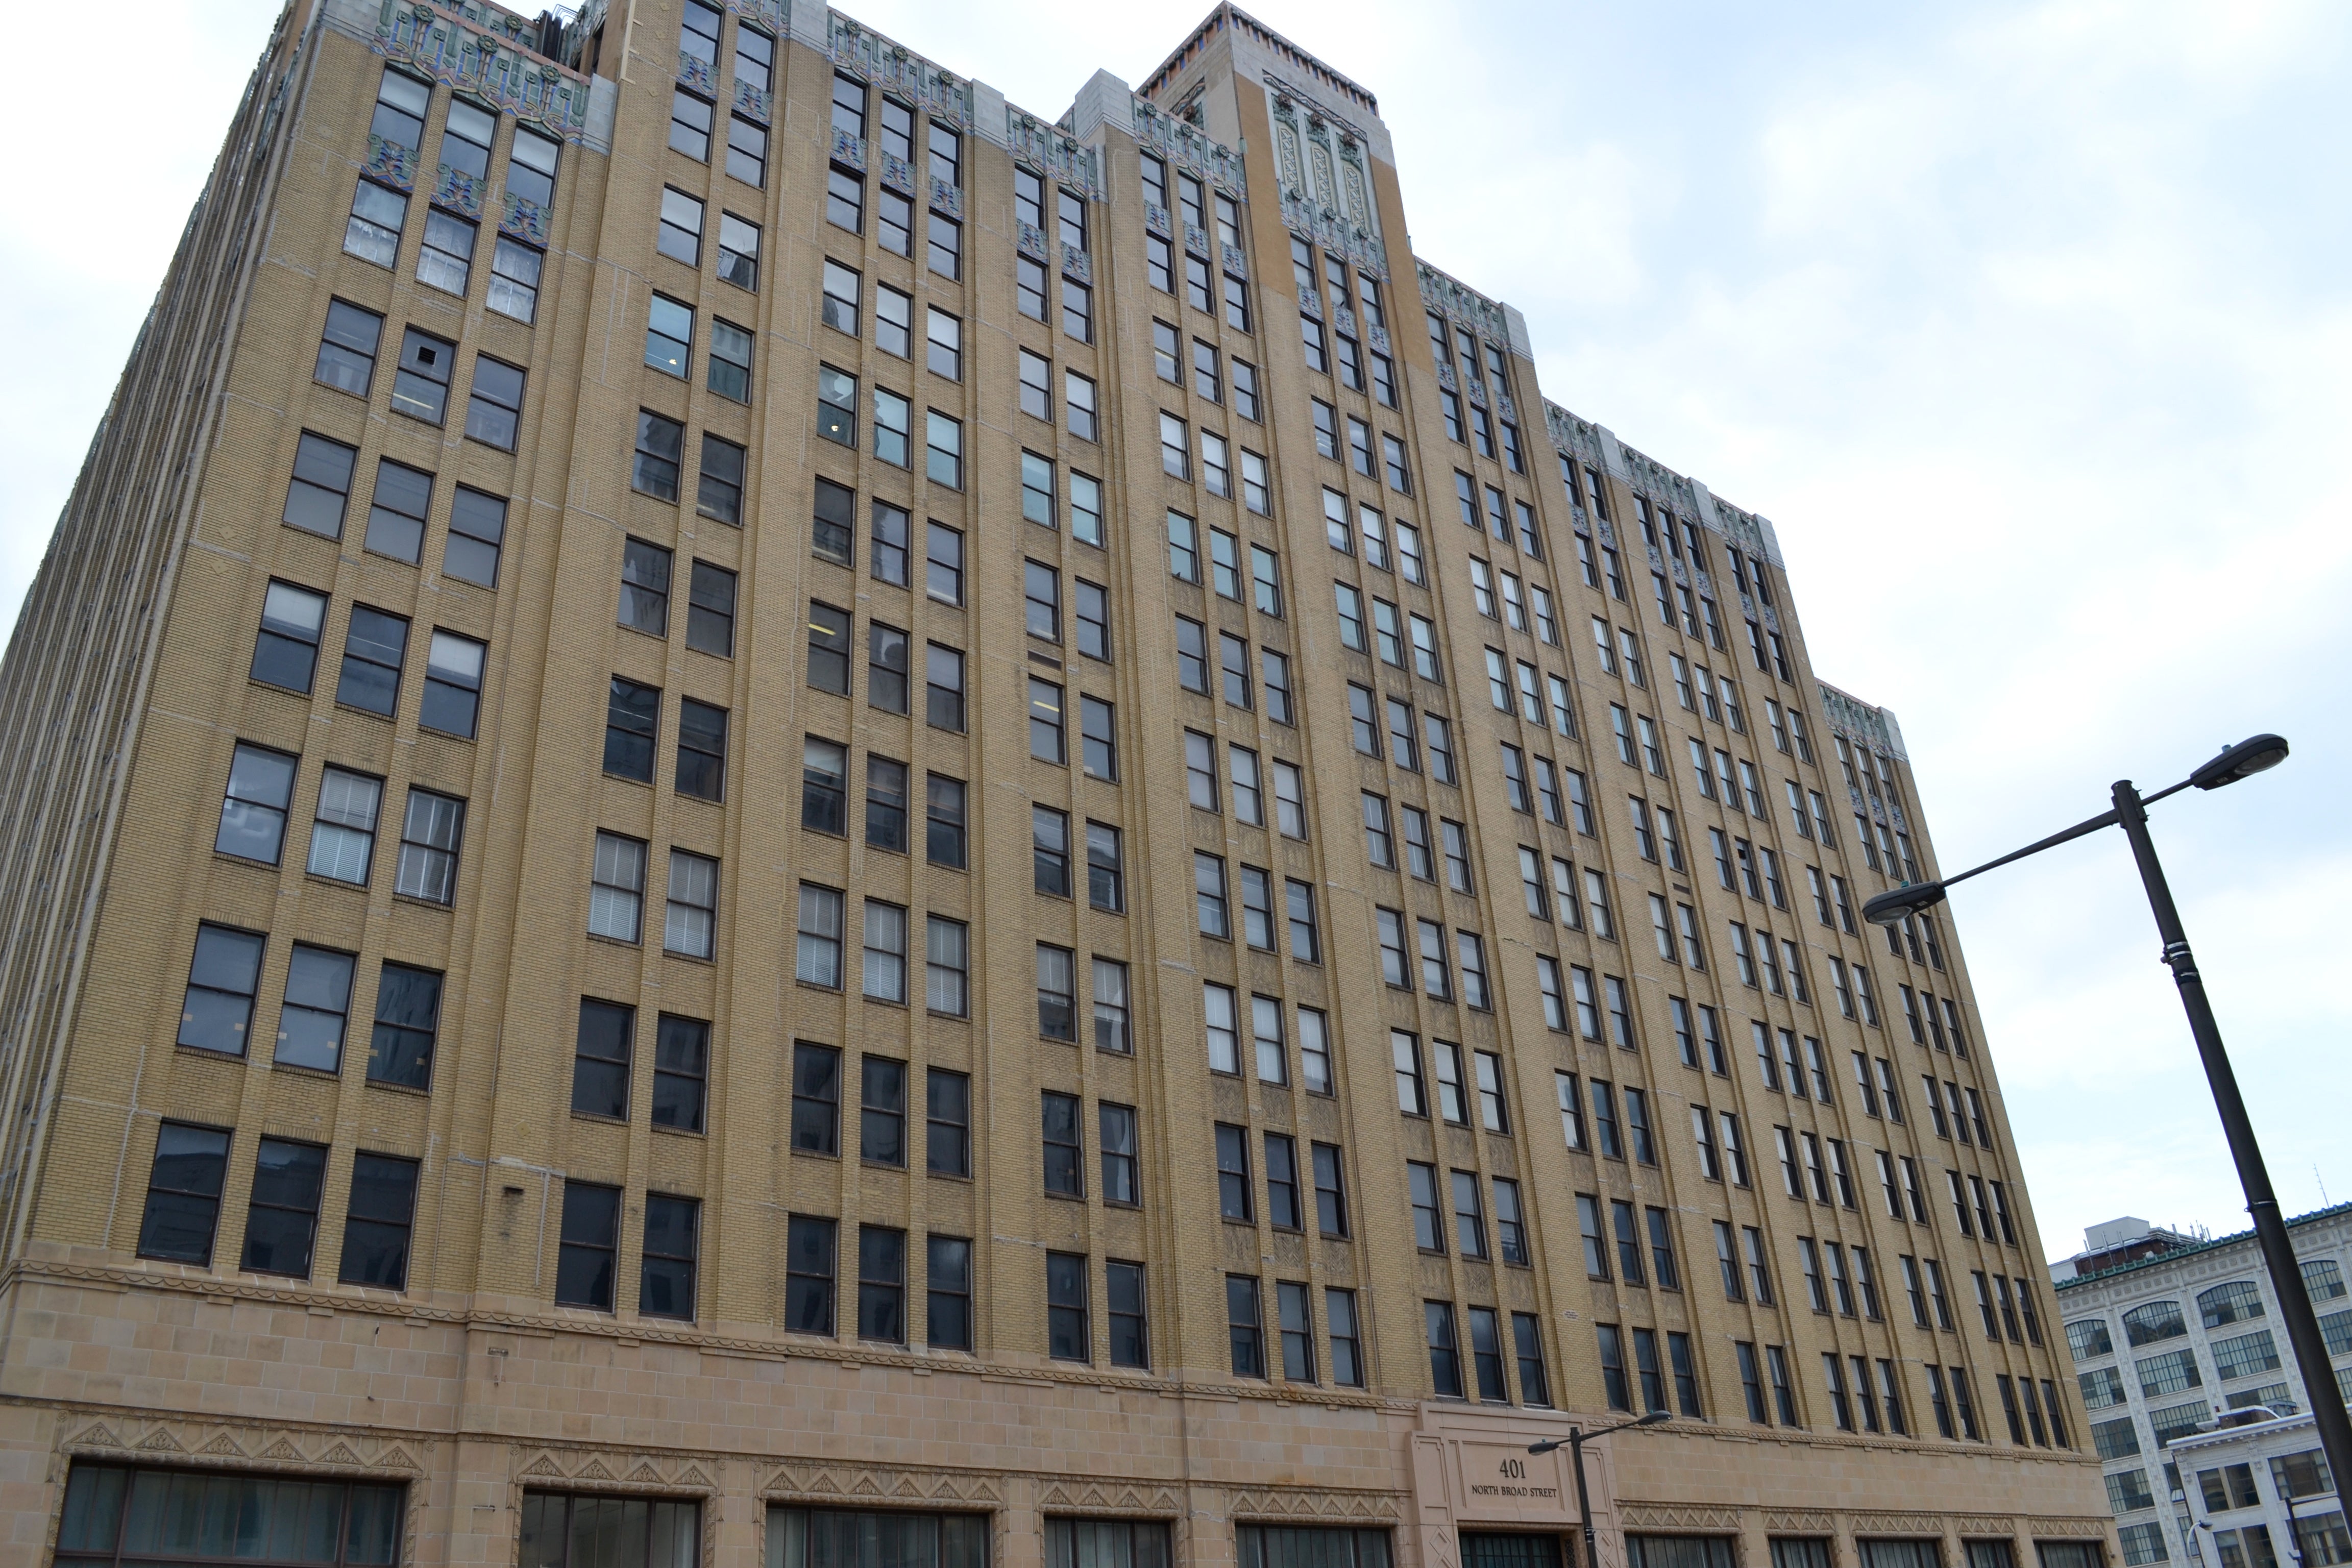 The former Terminal Commerce Building sits just east of the bridge at 401 North Broad street